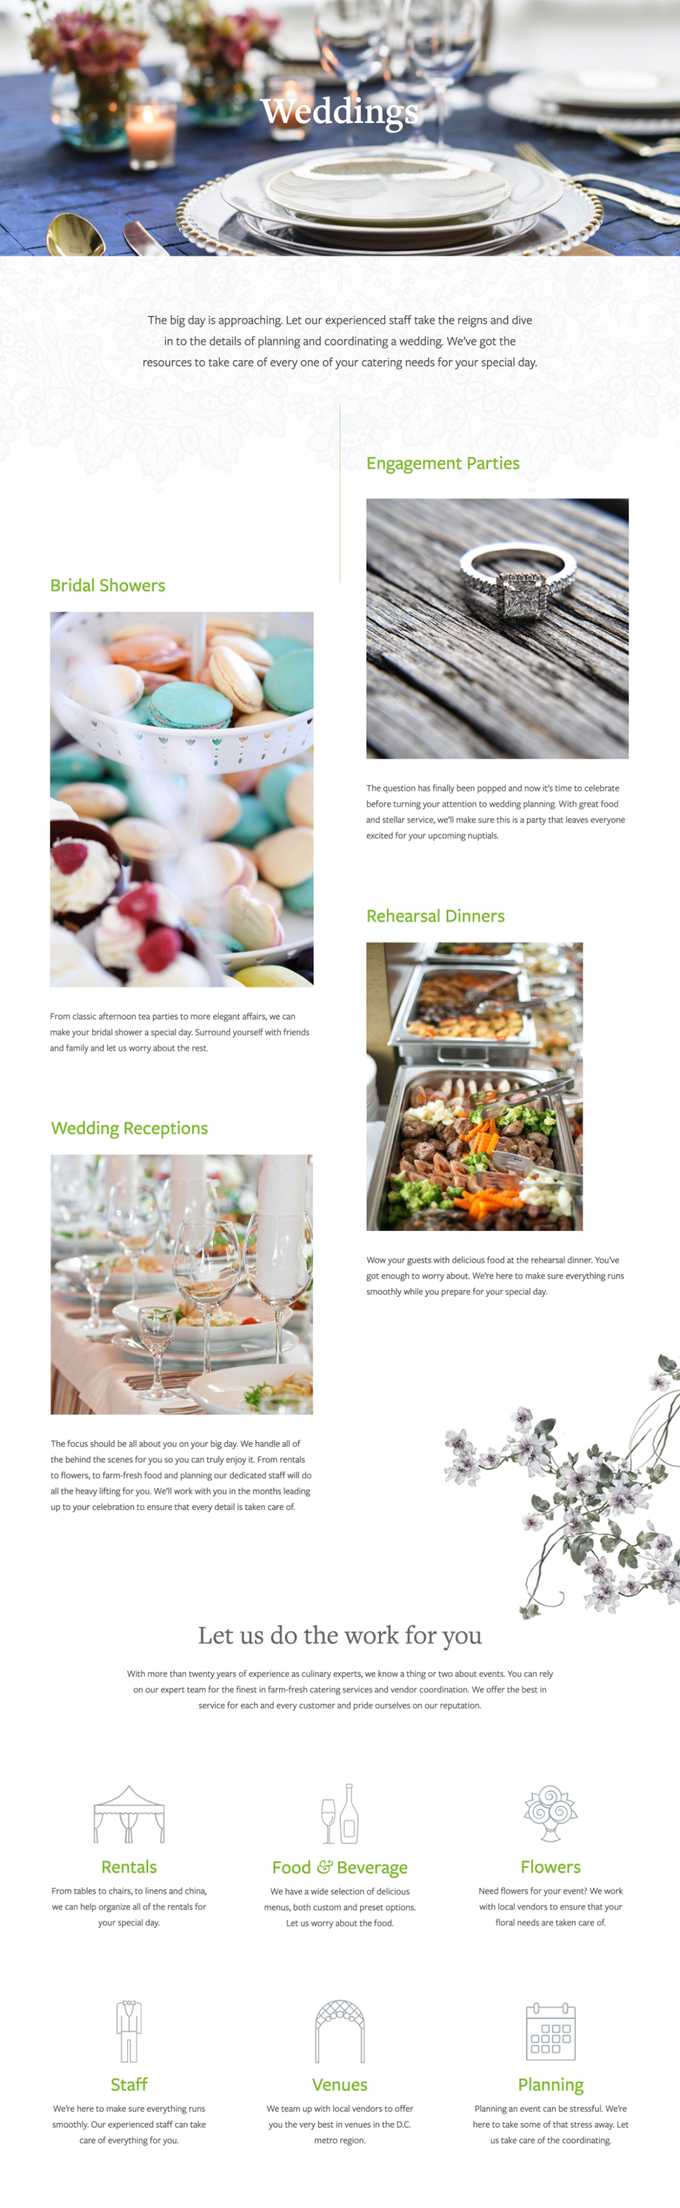 Displaying Catering Services related to Weedings